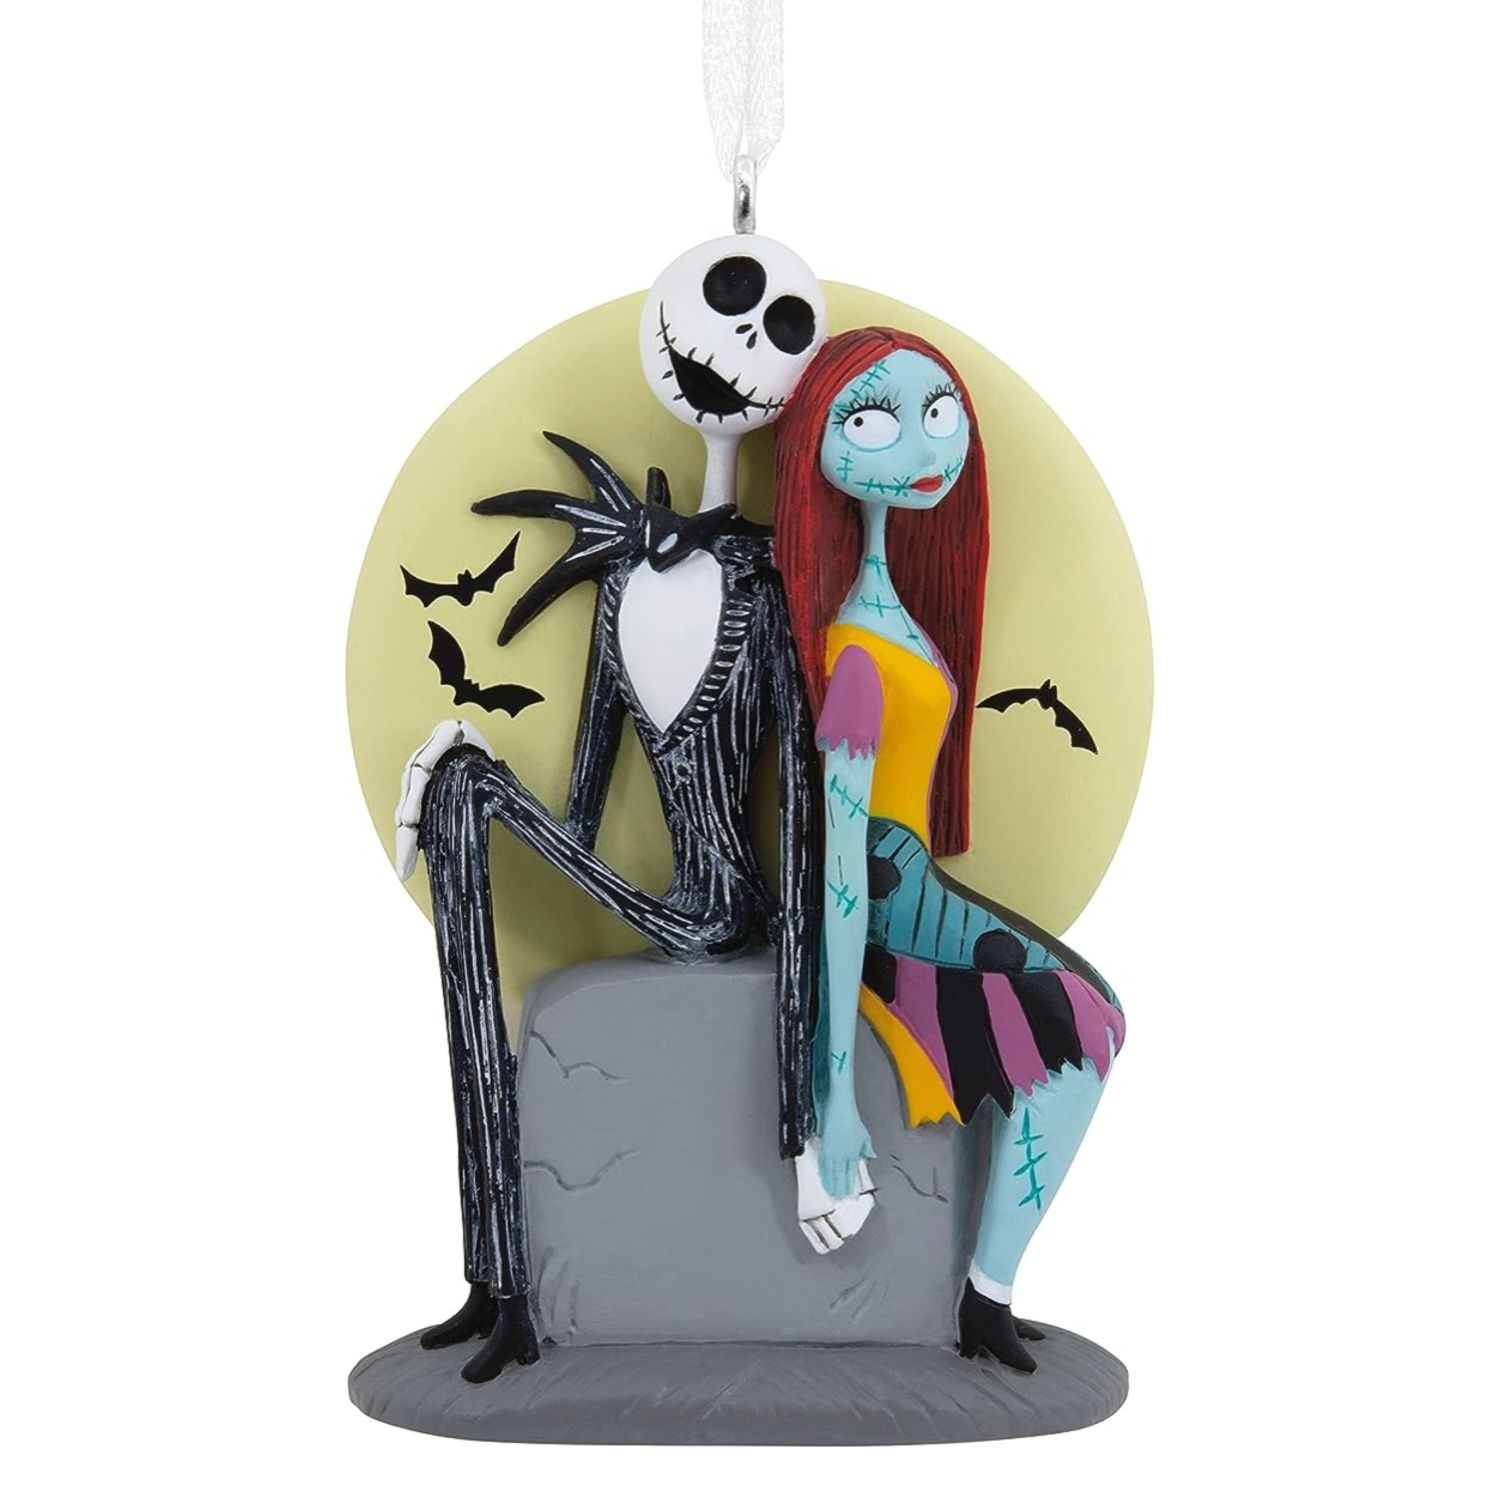 This ornament features Jack and Sally sitting on a grave holding hands